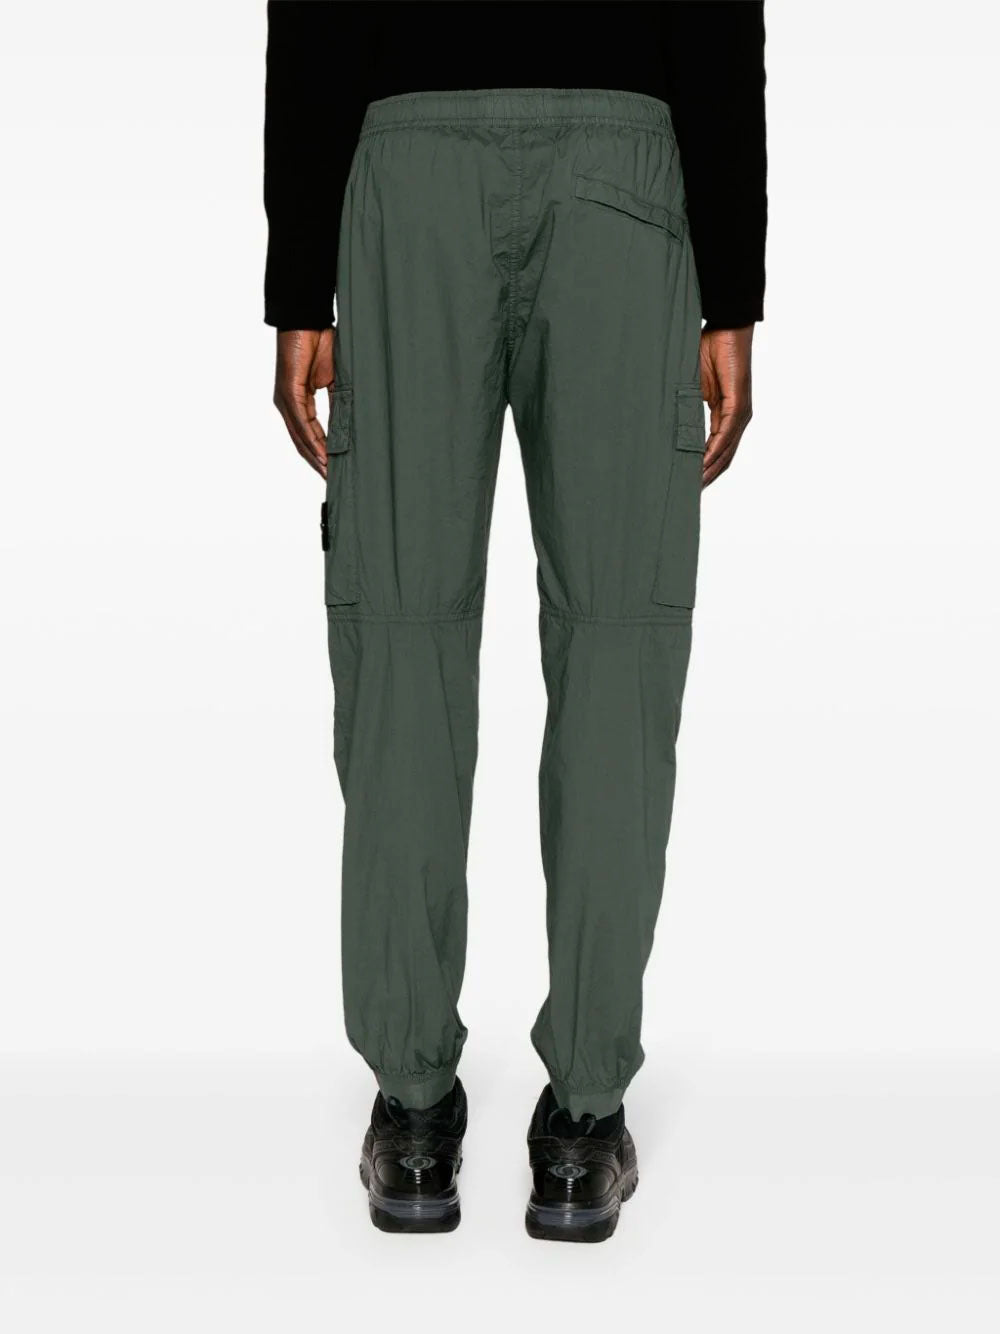 Compass-badge trousers